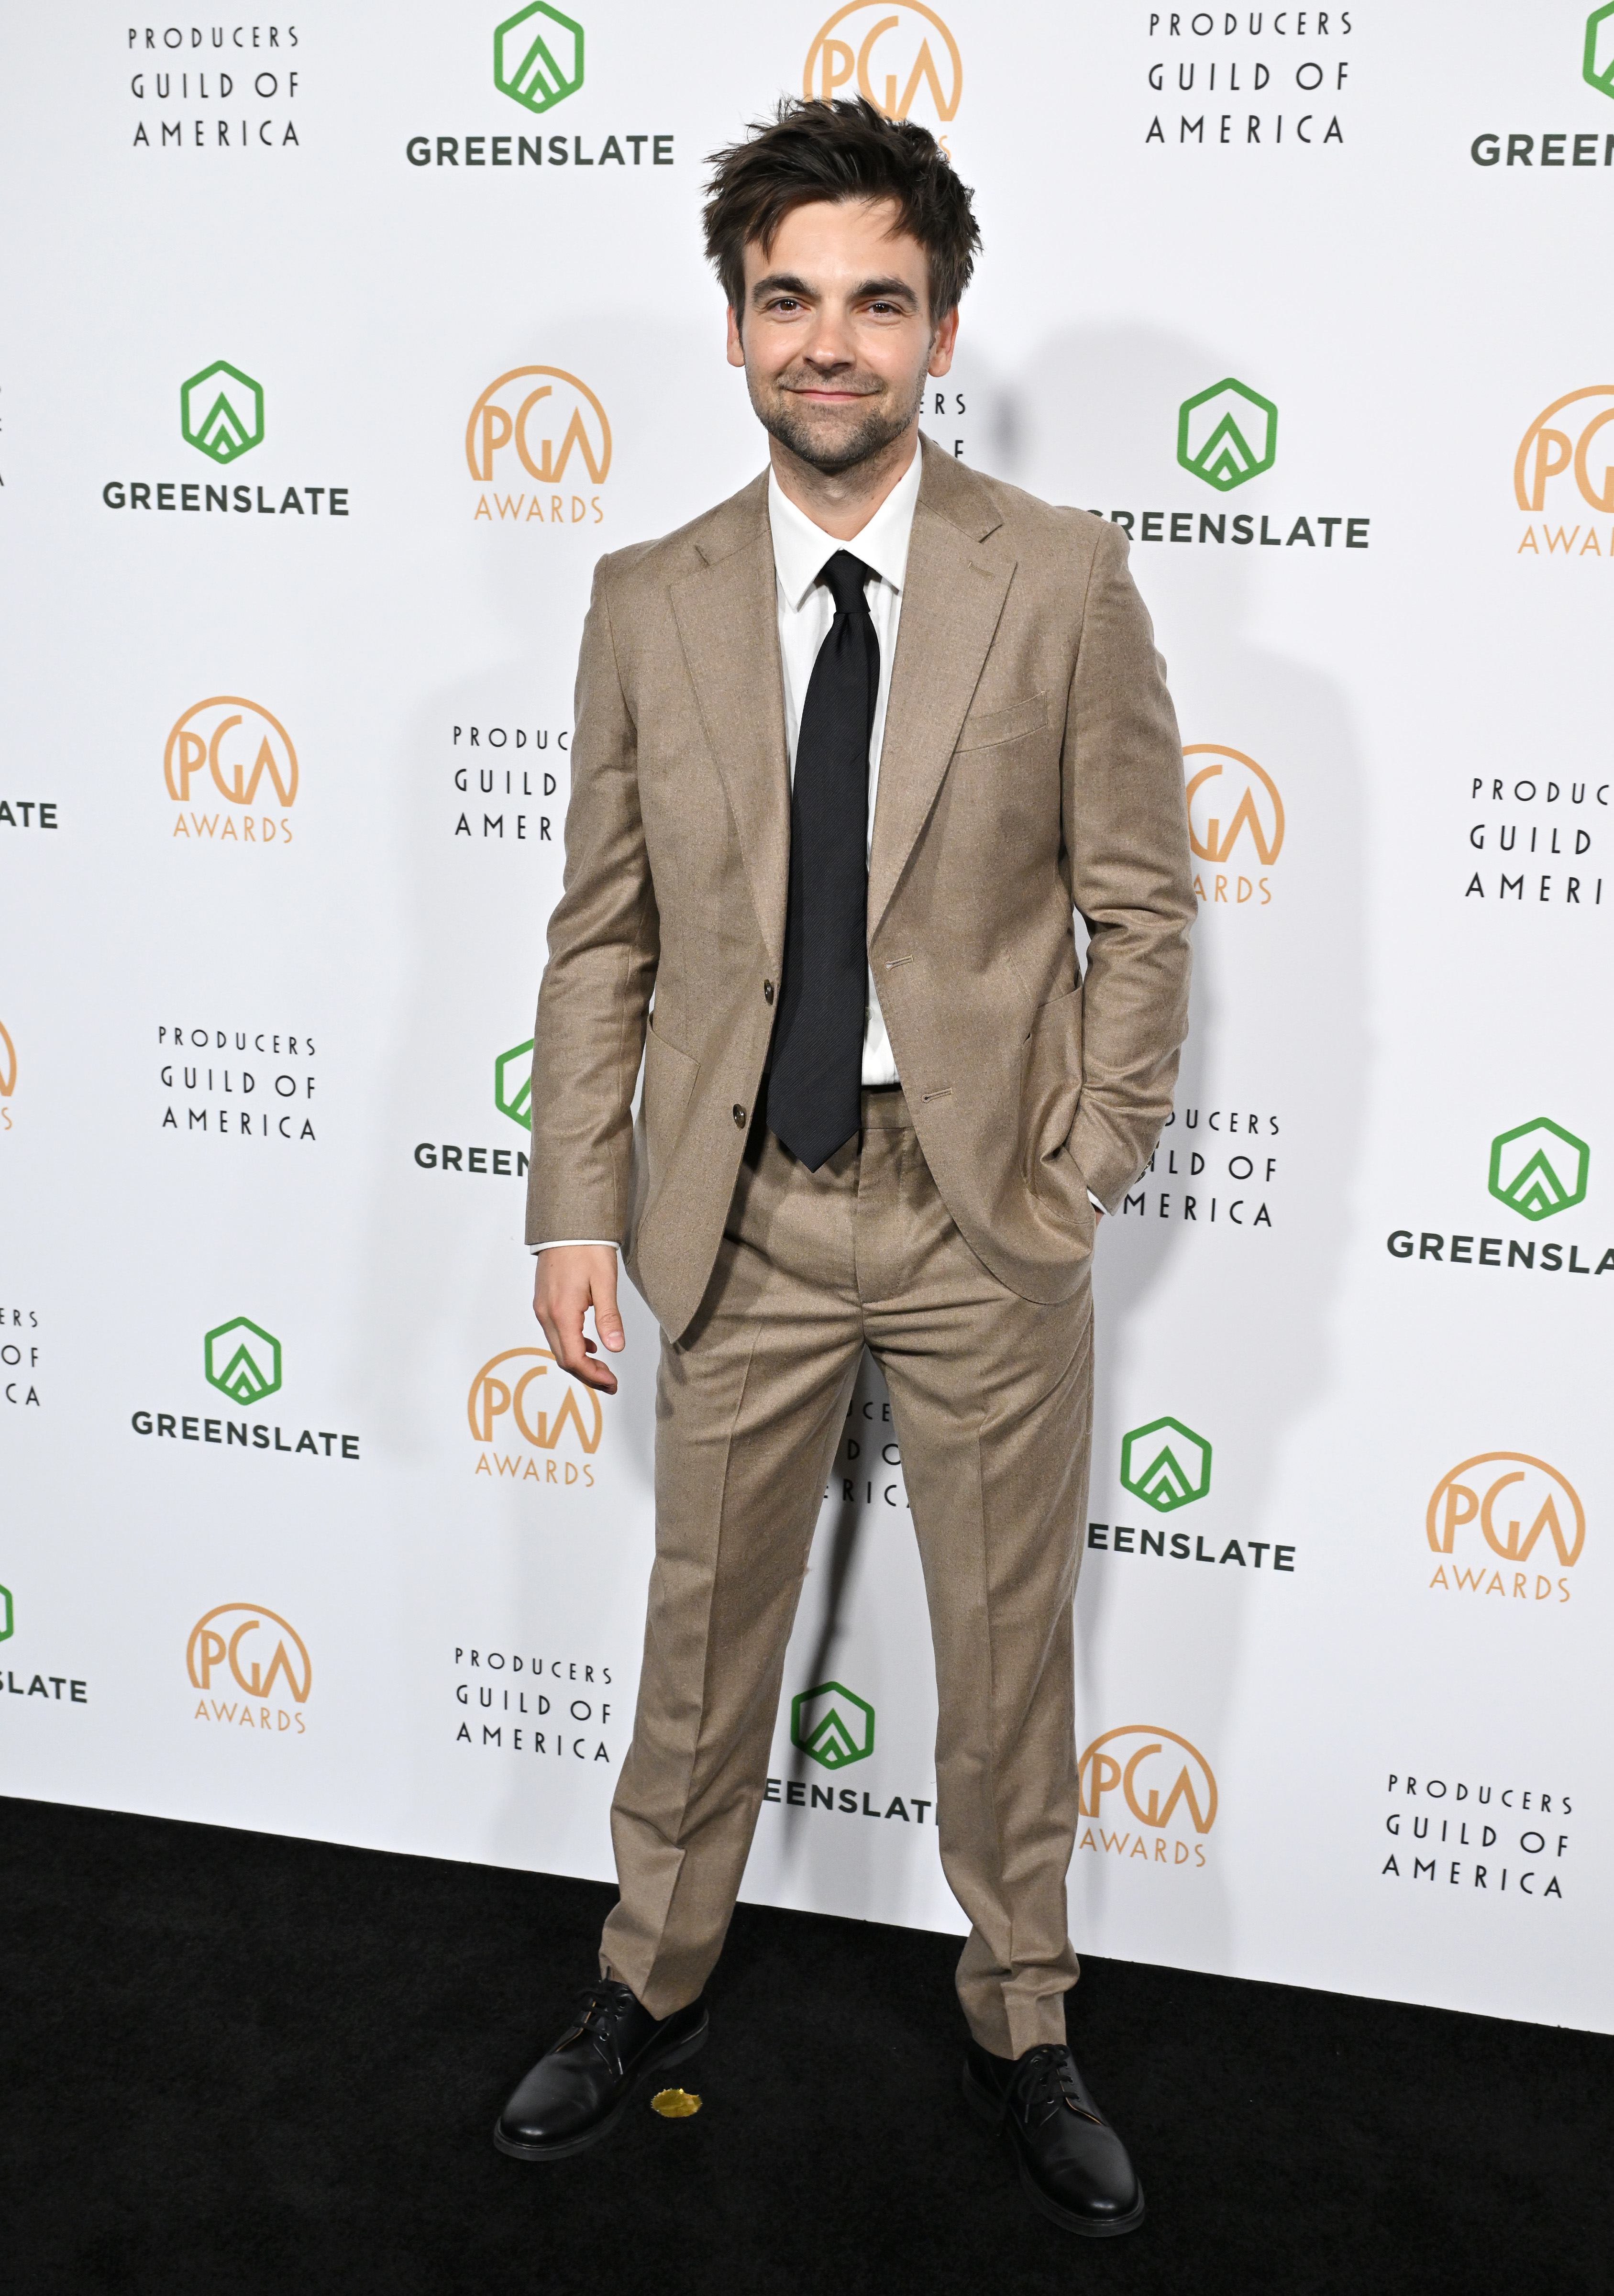 Drew in a tailored suit posing at the Producers Guild Awards